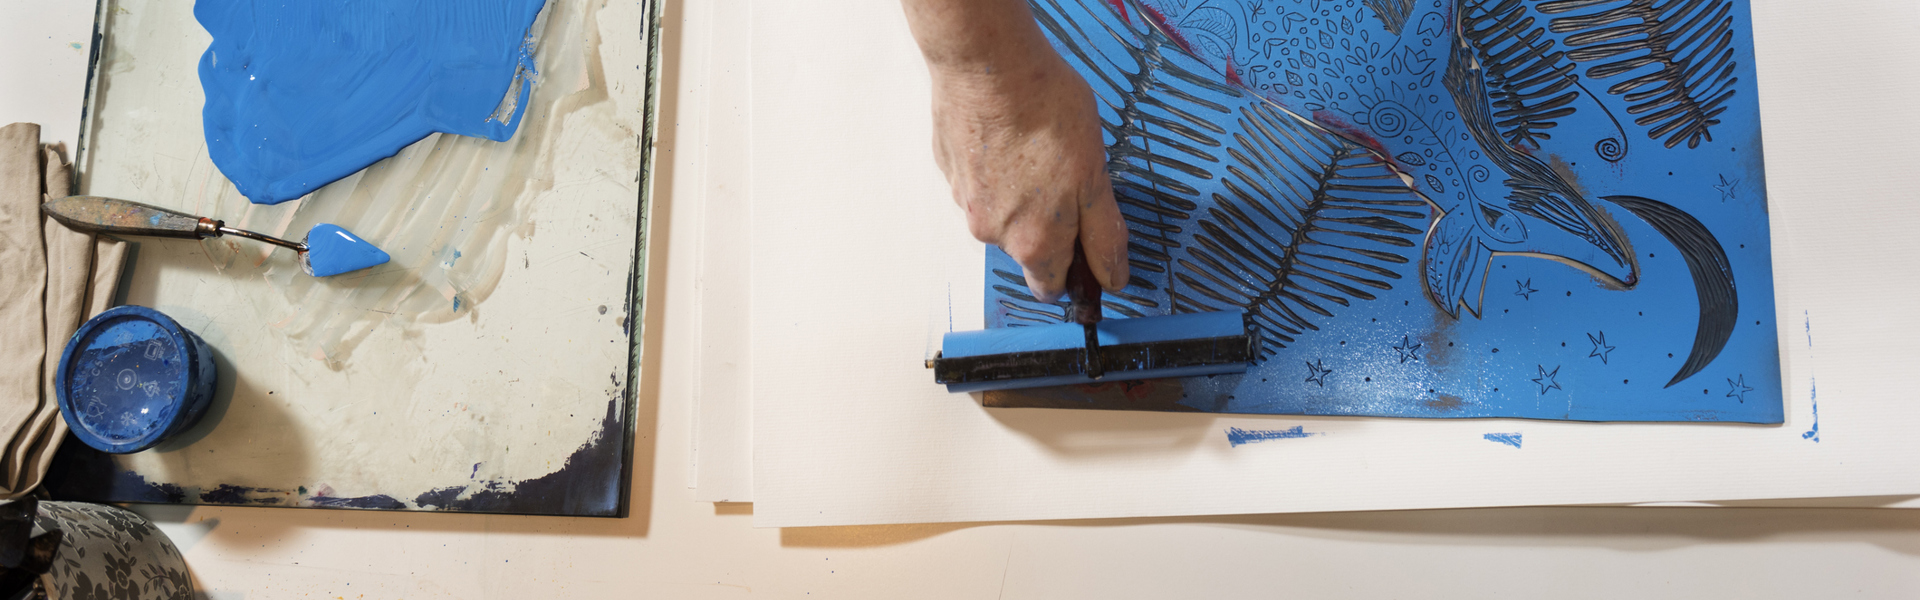 a person making a blue print work on a white surface